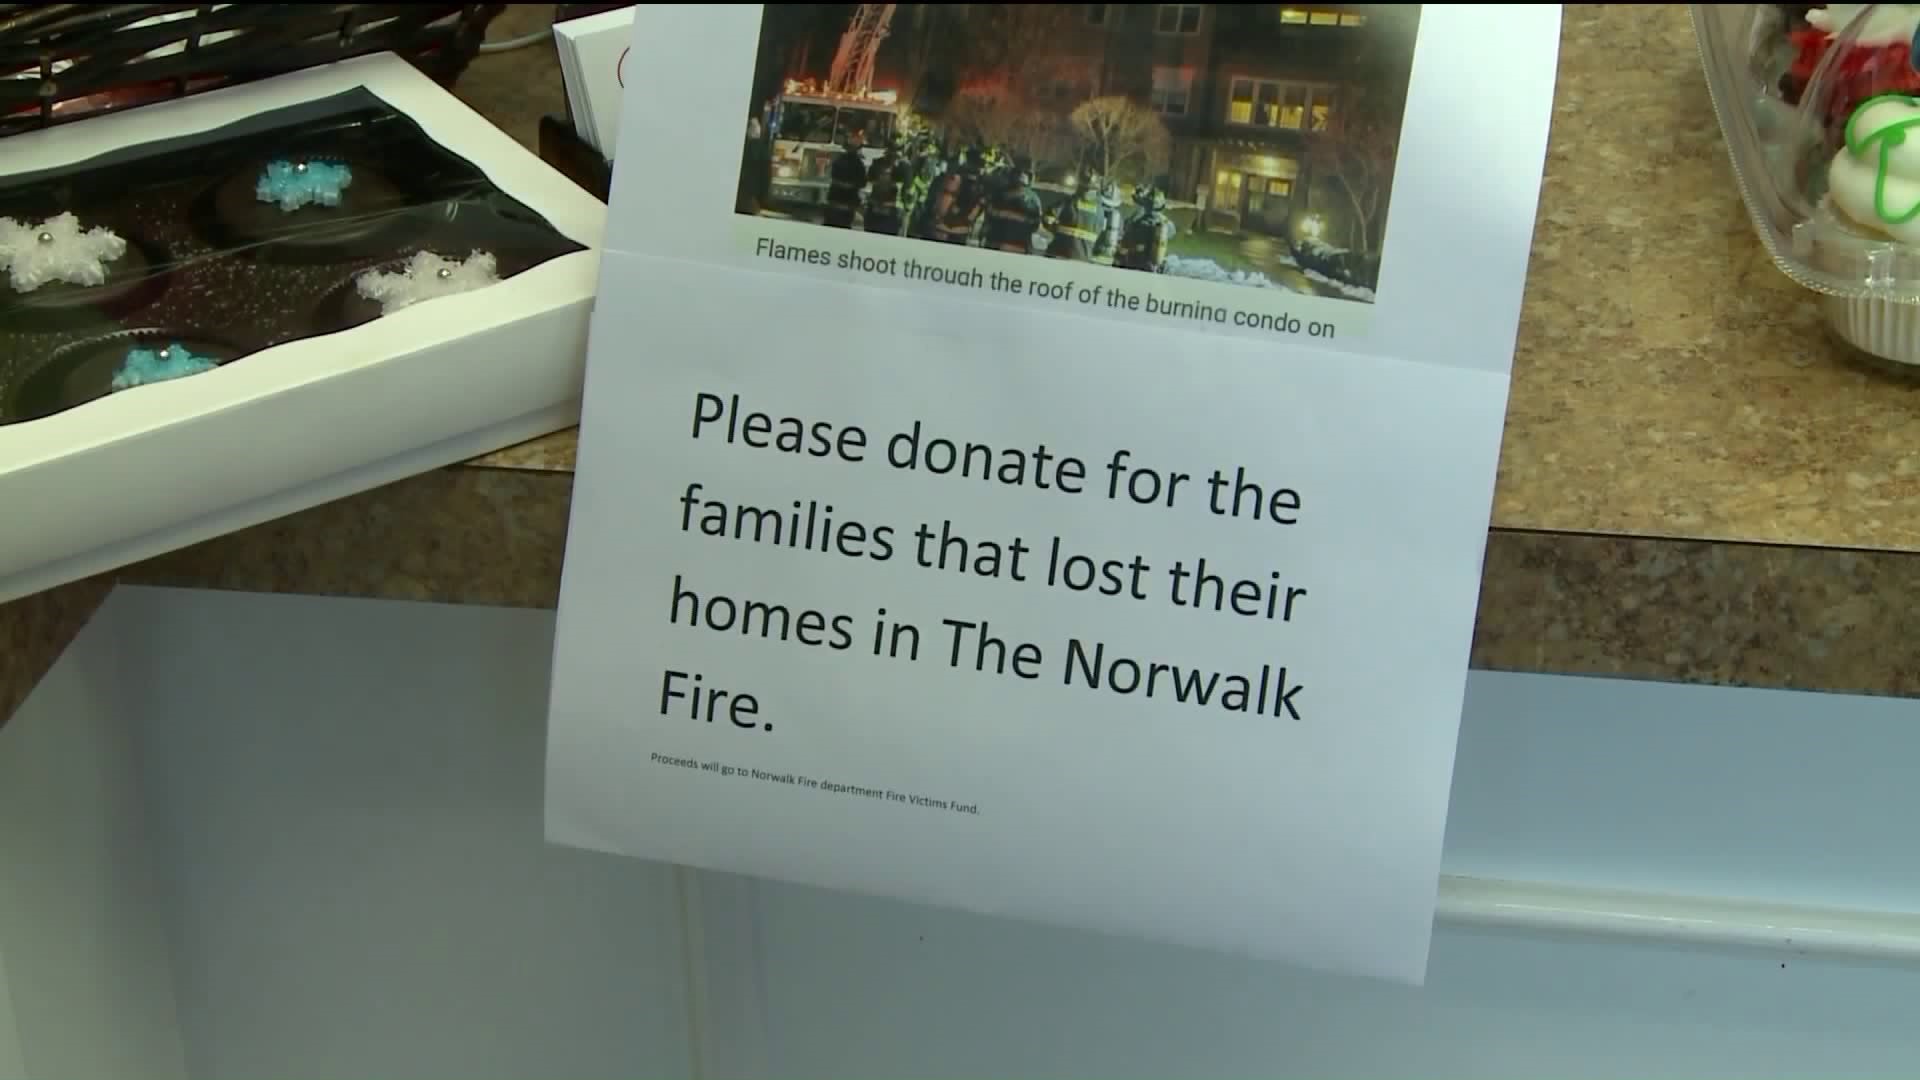 City and businesses assisting those displaced by large Norwalk fire